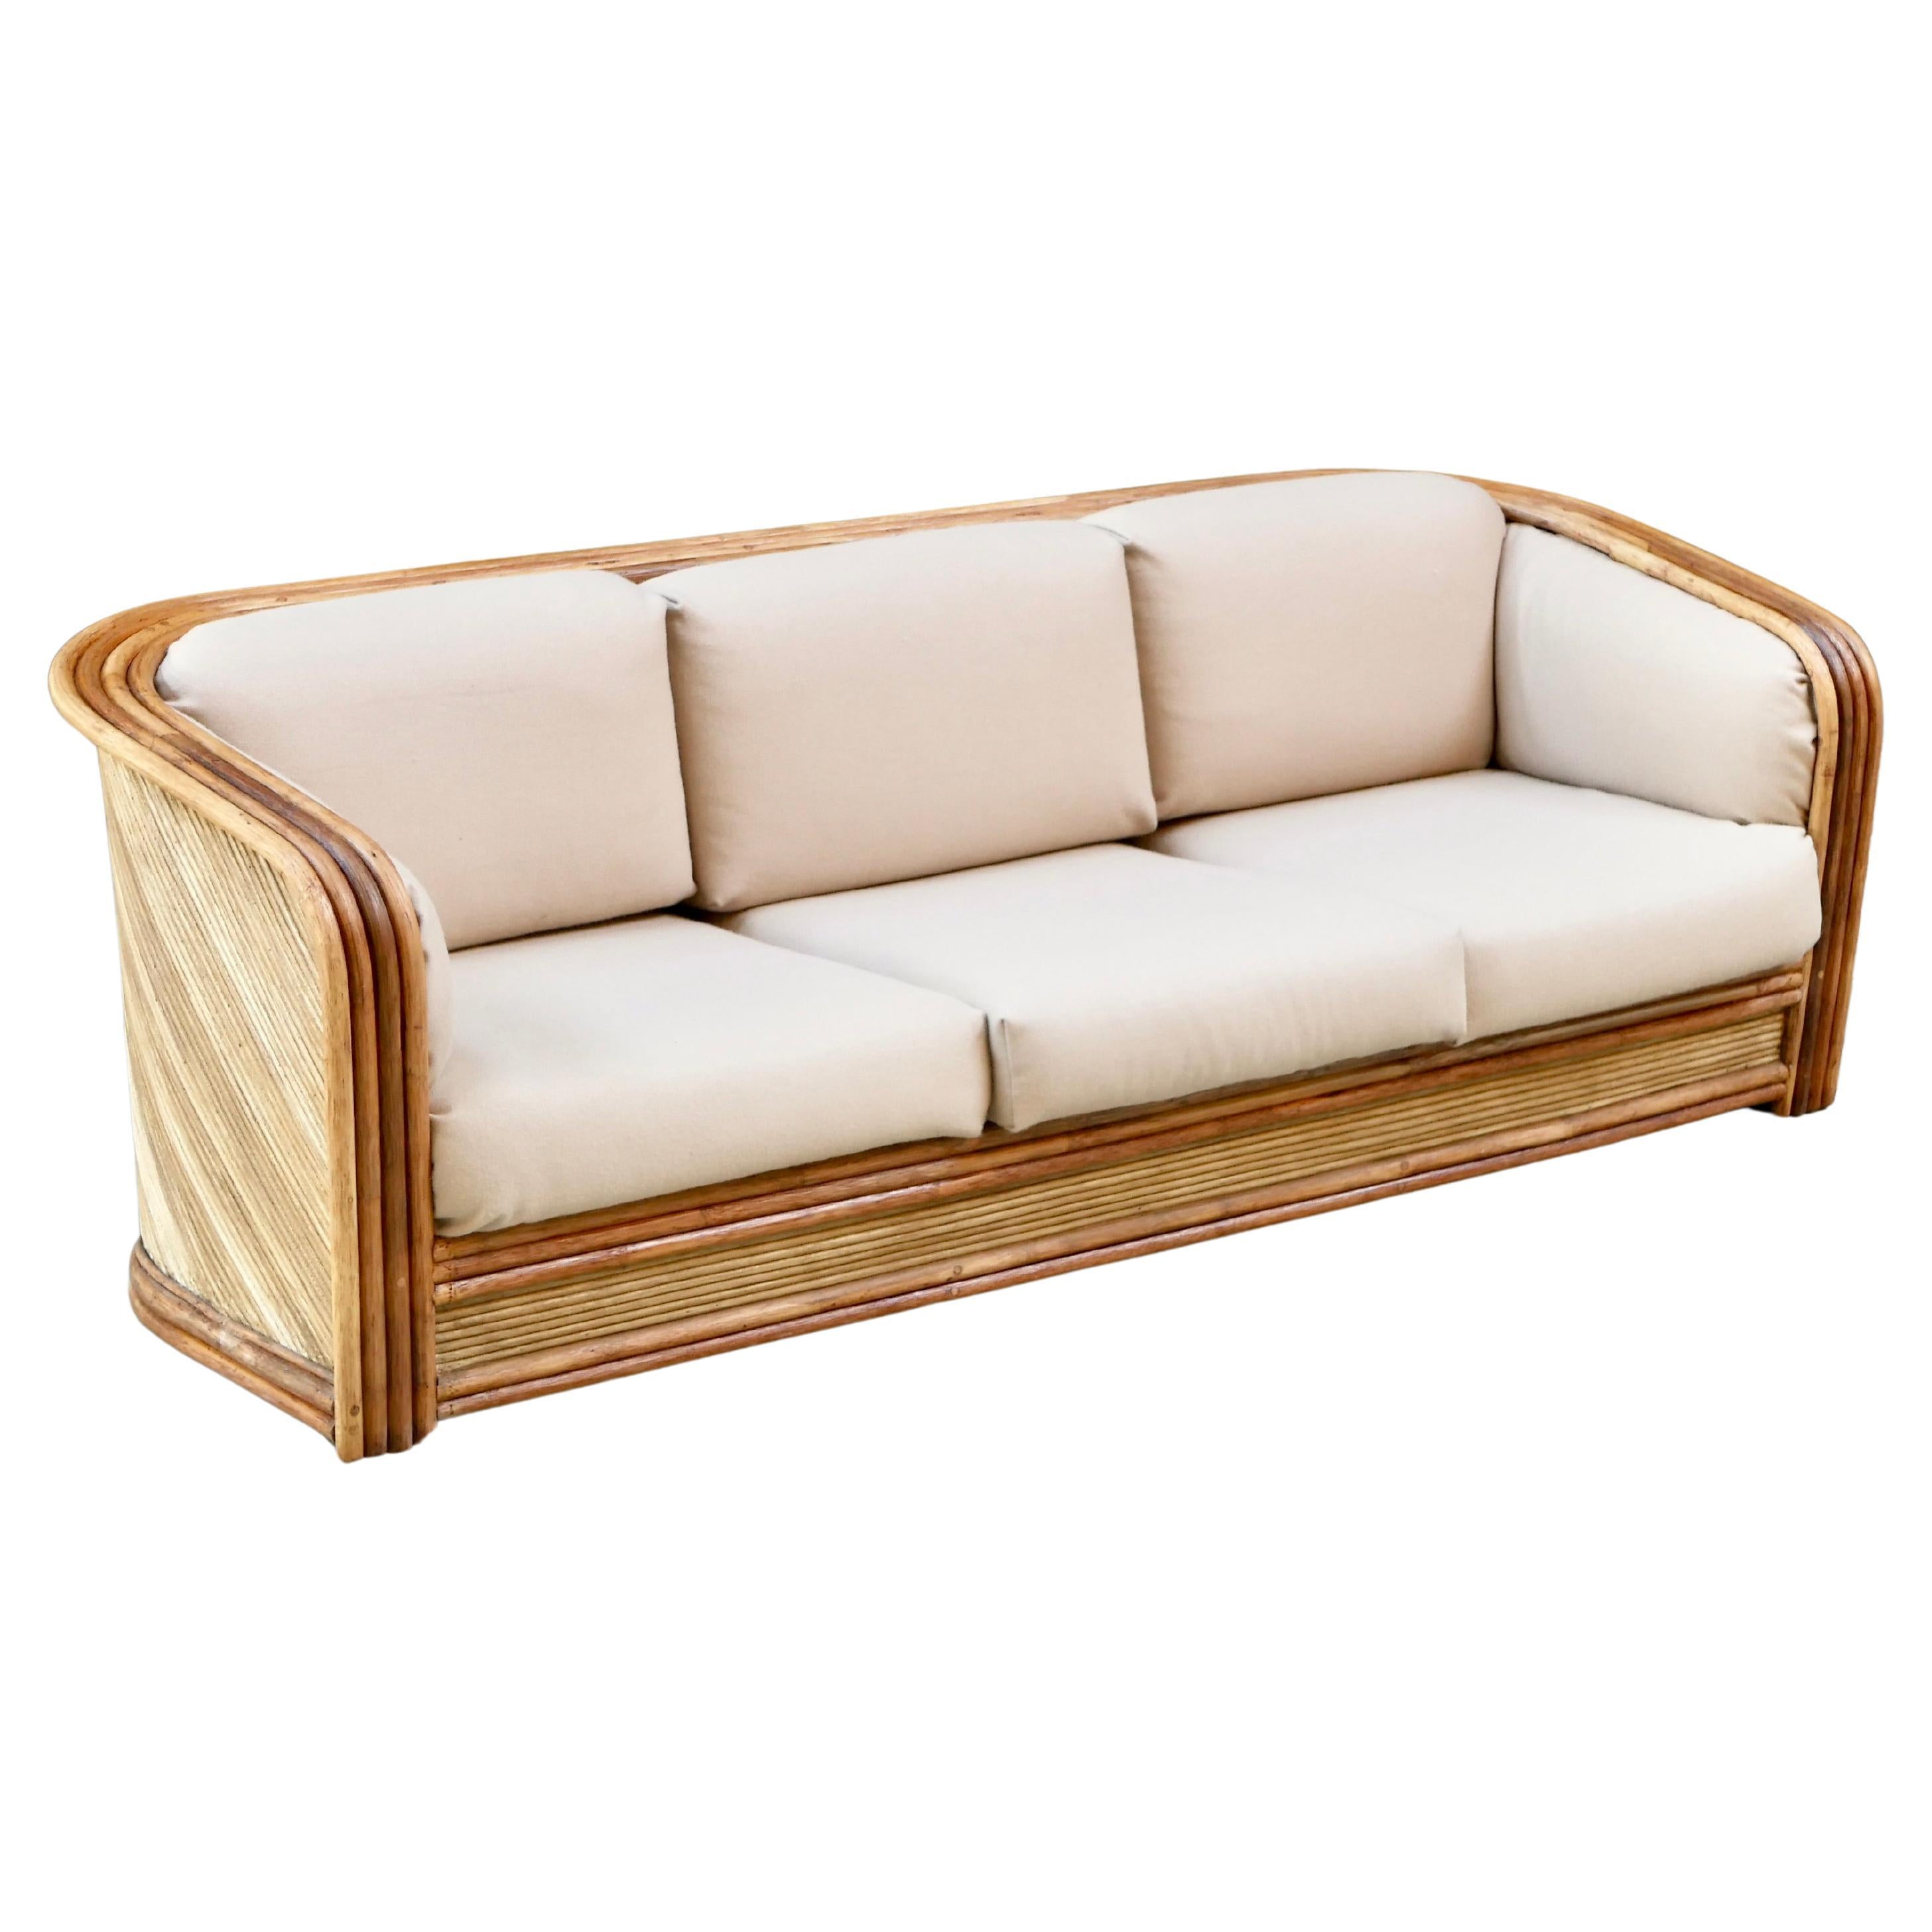 Rattan sofa by Maugrion for Roche Bobois, France, 1970s